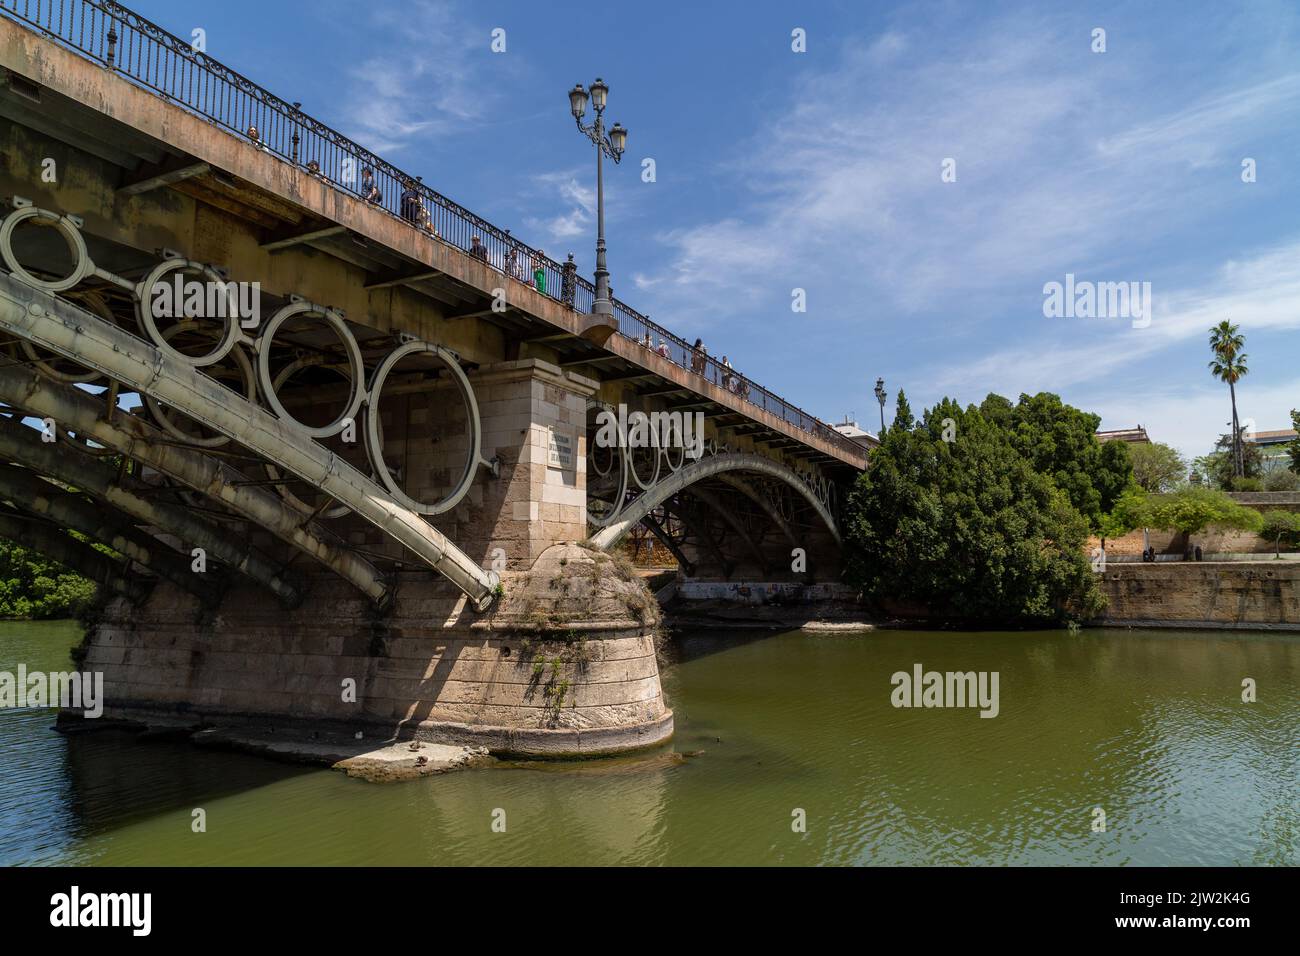 District of Triana, Seville, Spain Stock Photo